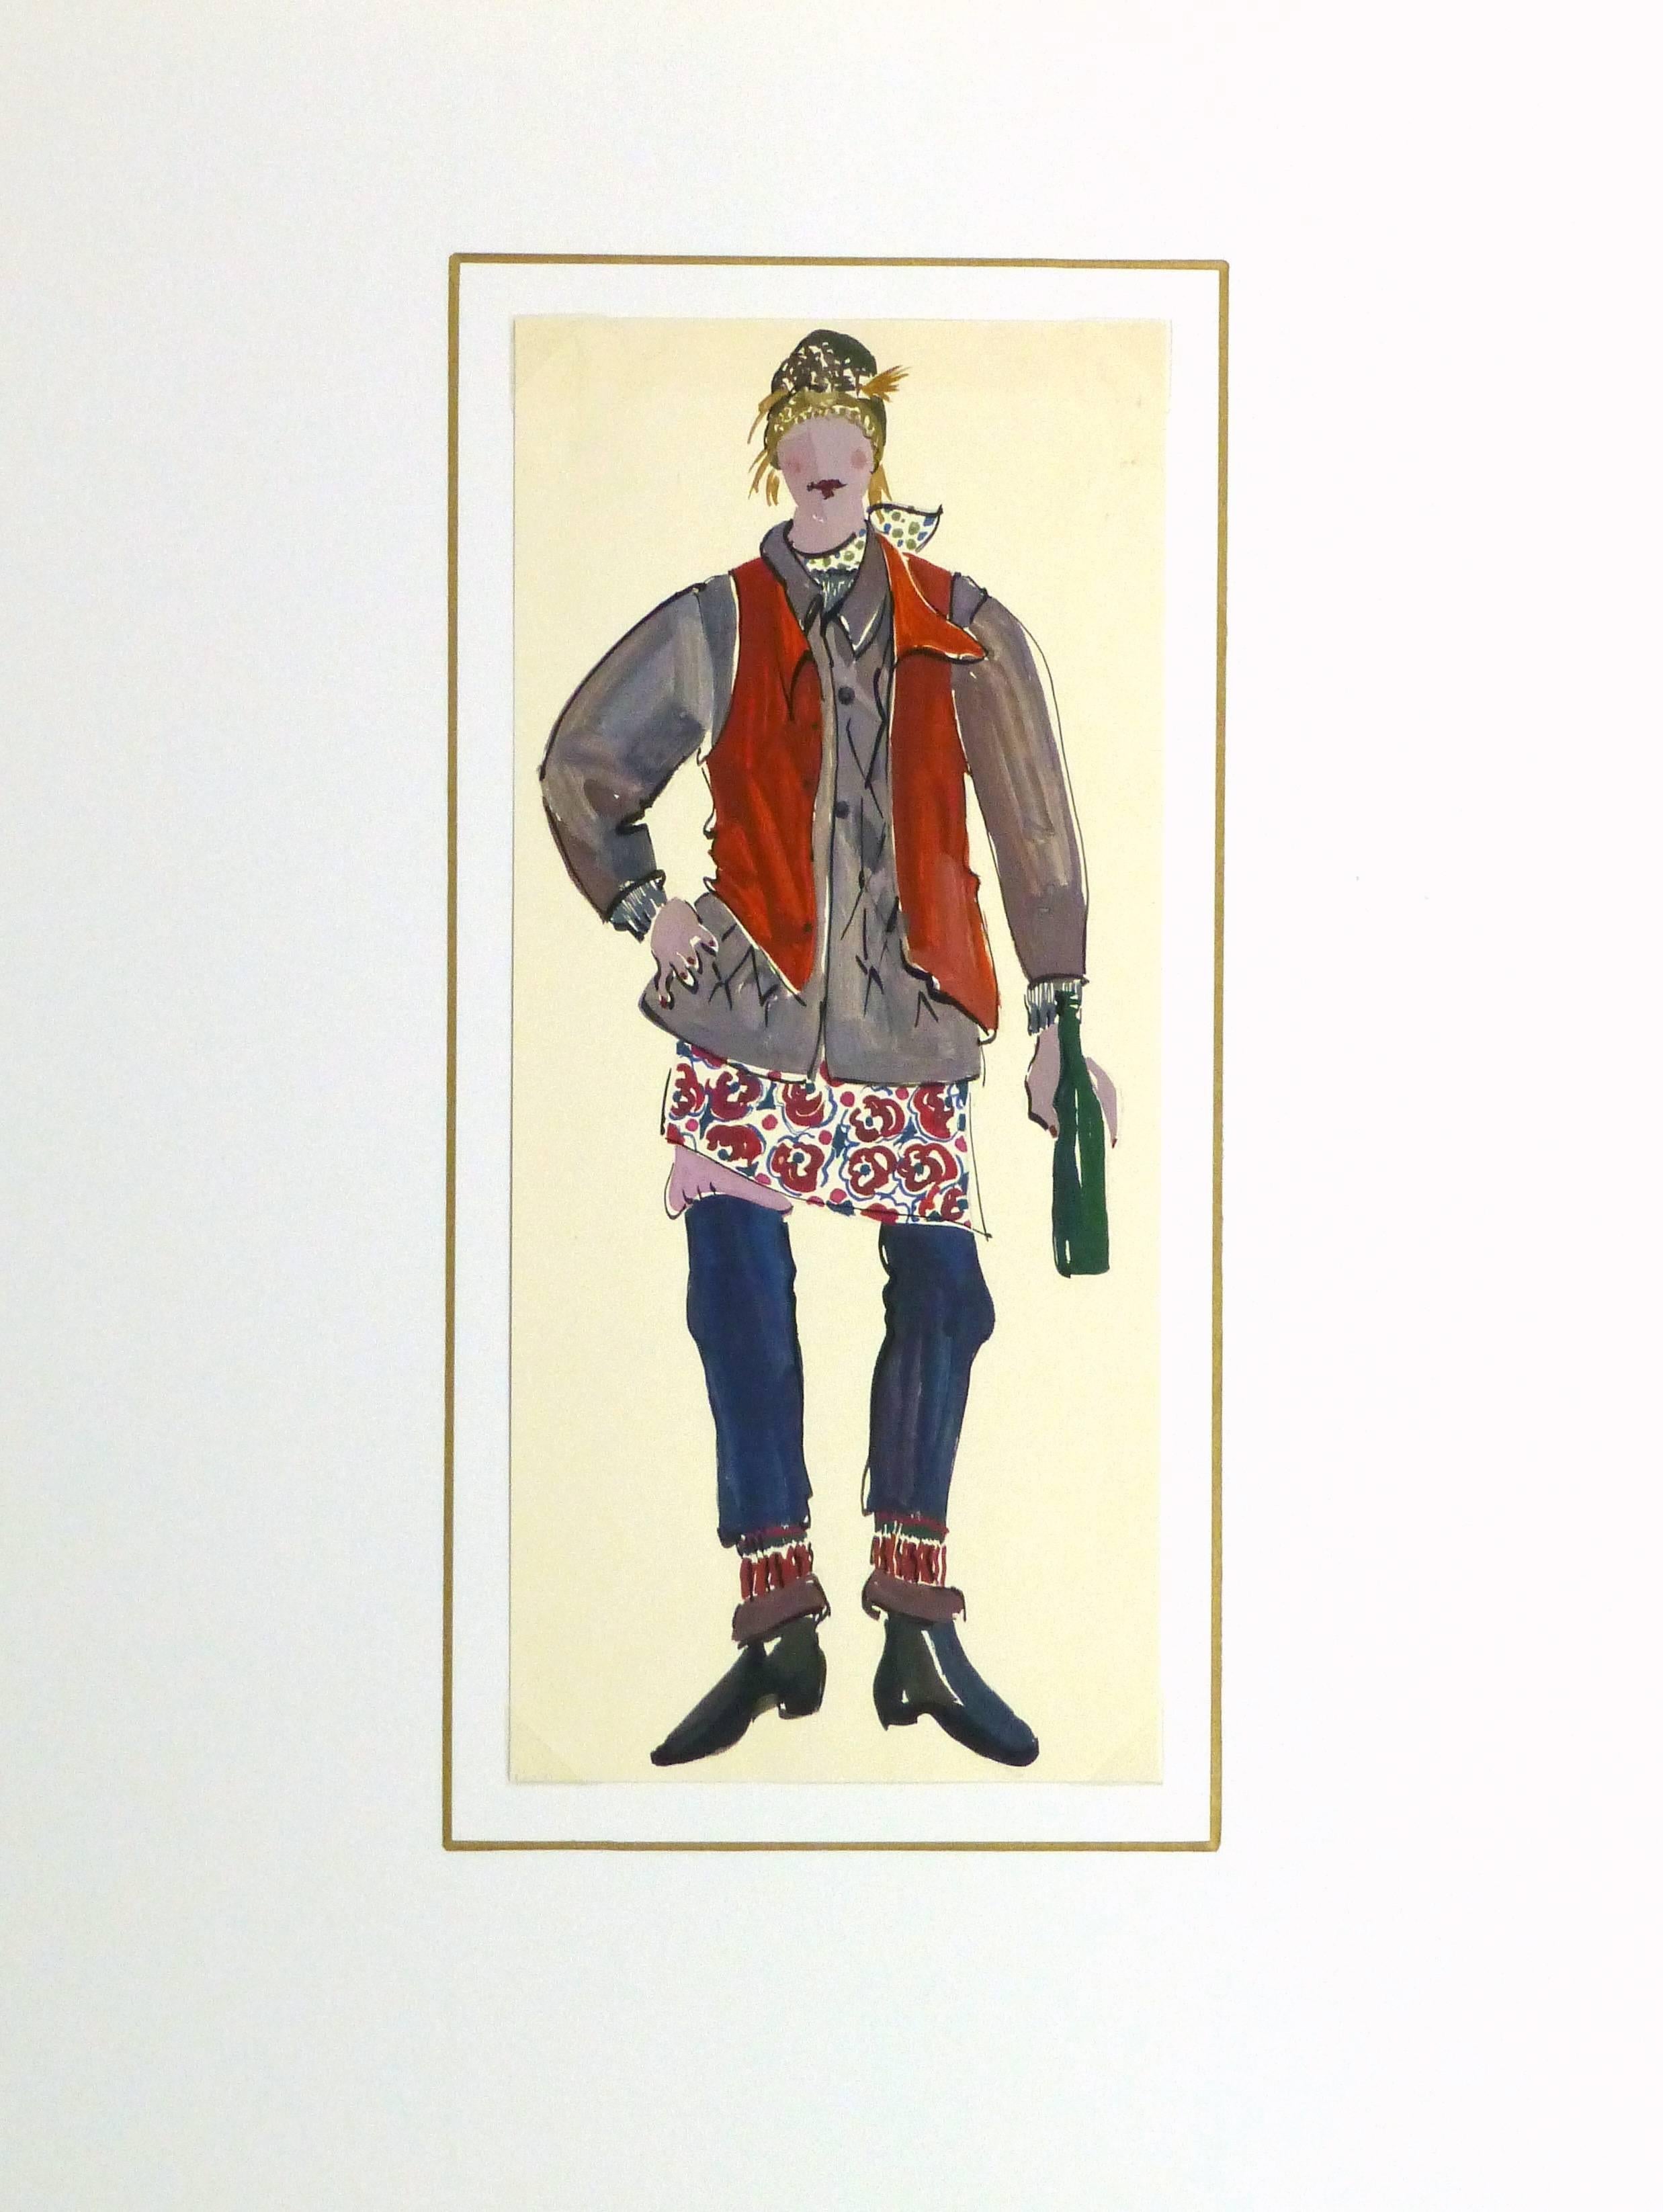 Vintage gouache fashion sketch of a casual and layered cold weather outfit, circa 1970.

Original one-of-a-kind artwork on paper displayed on a white mat with a gold border. Mat fits a standard-size frame. Archival plastic sleeve and Certificate of